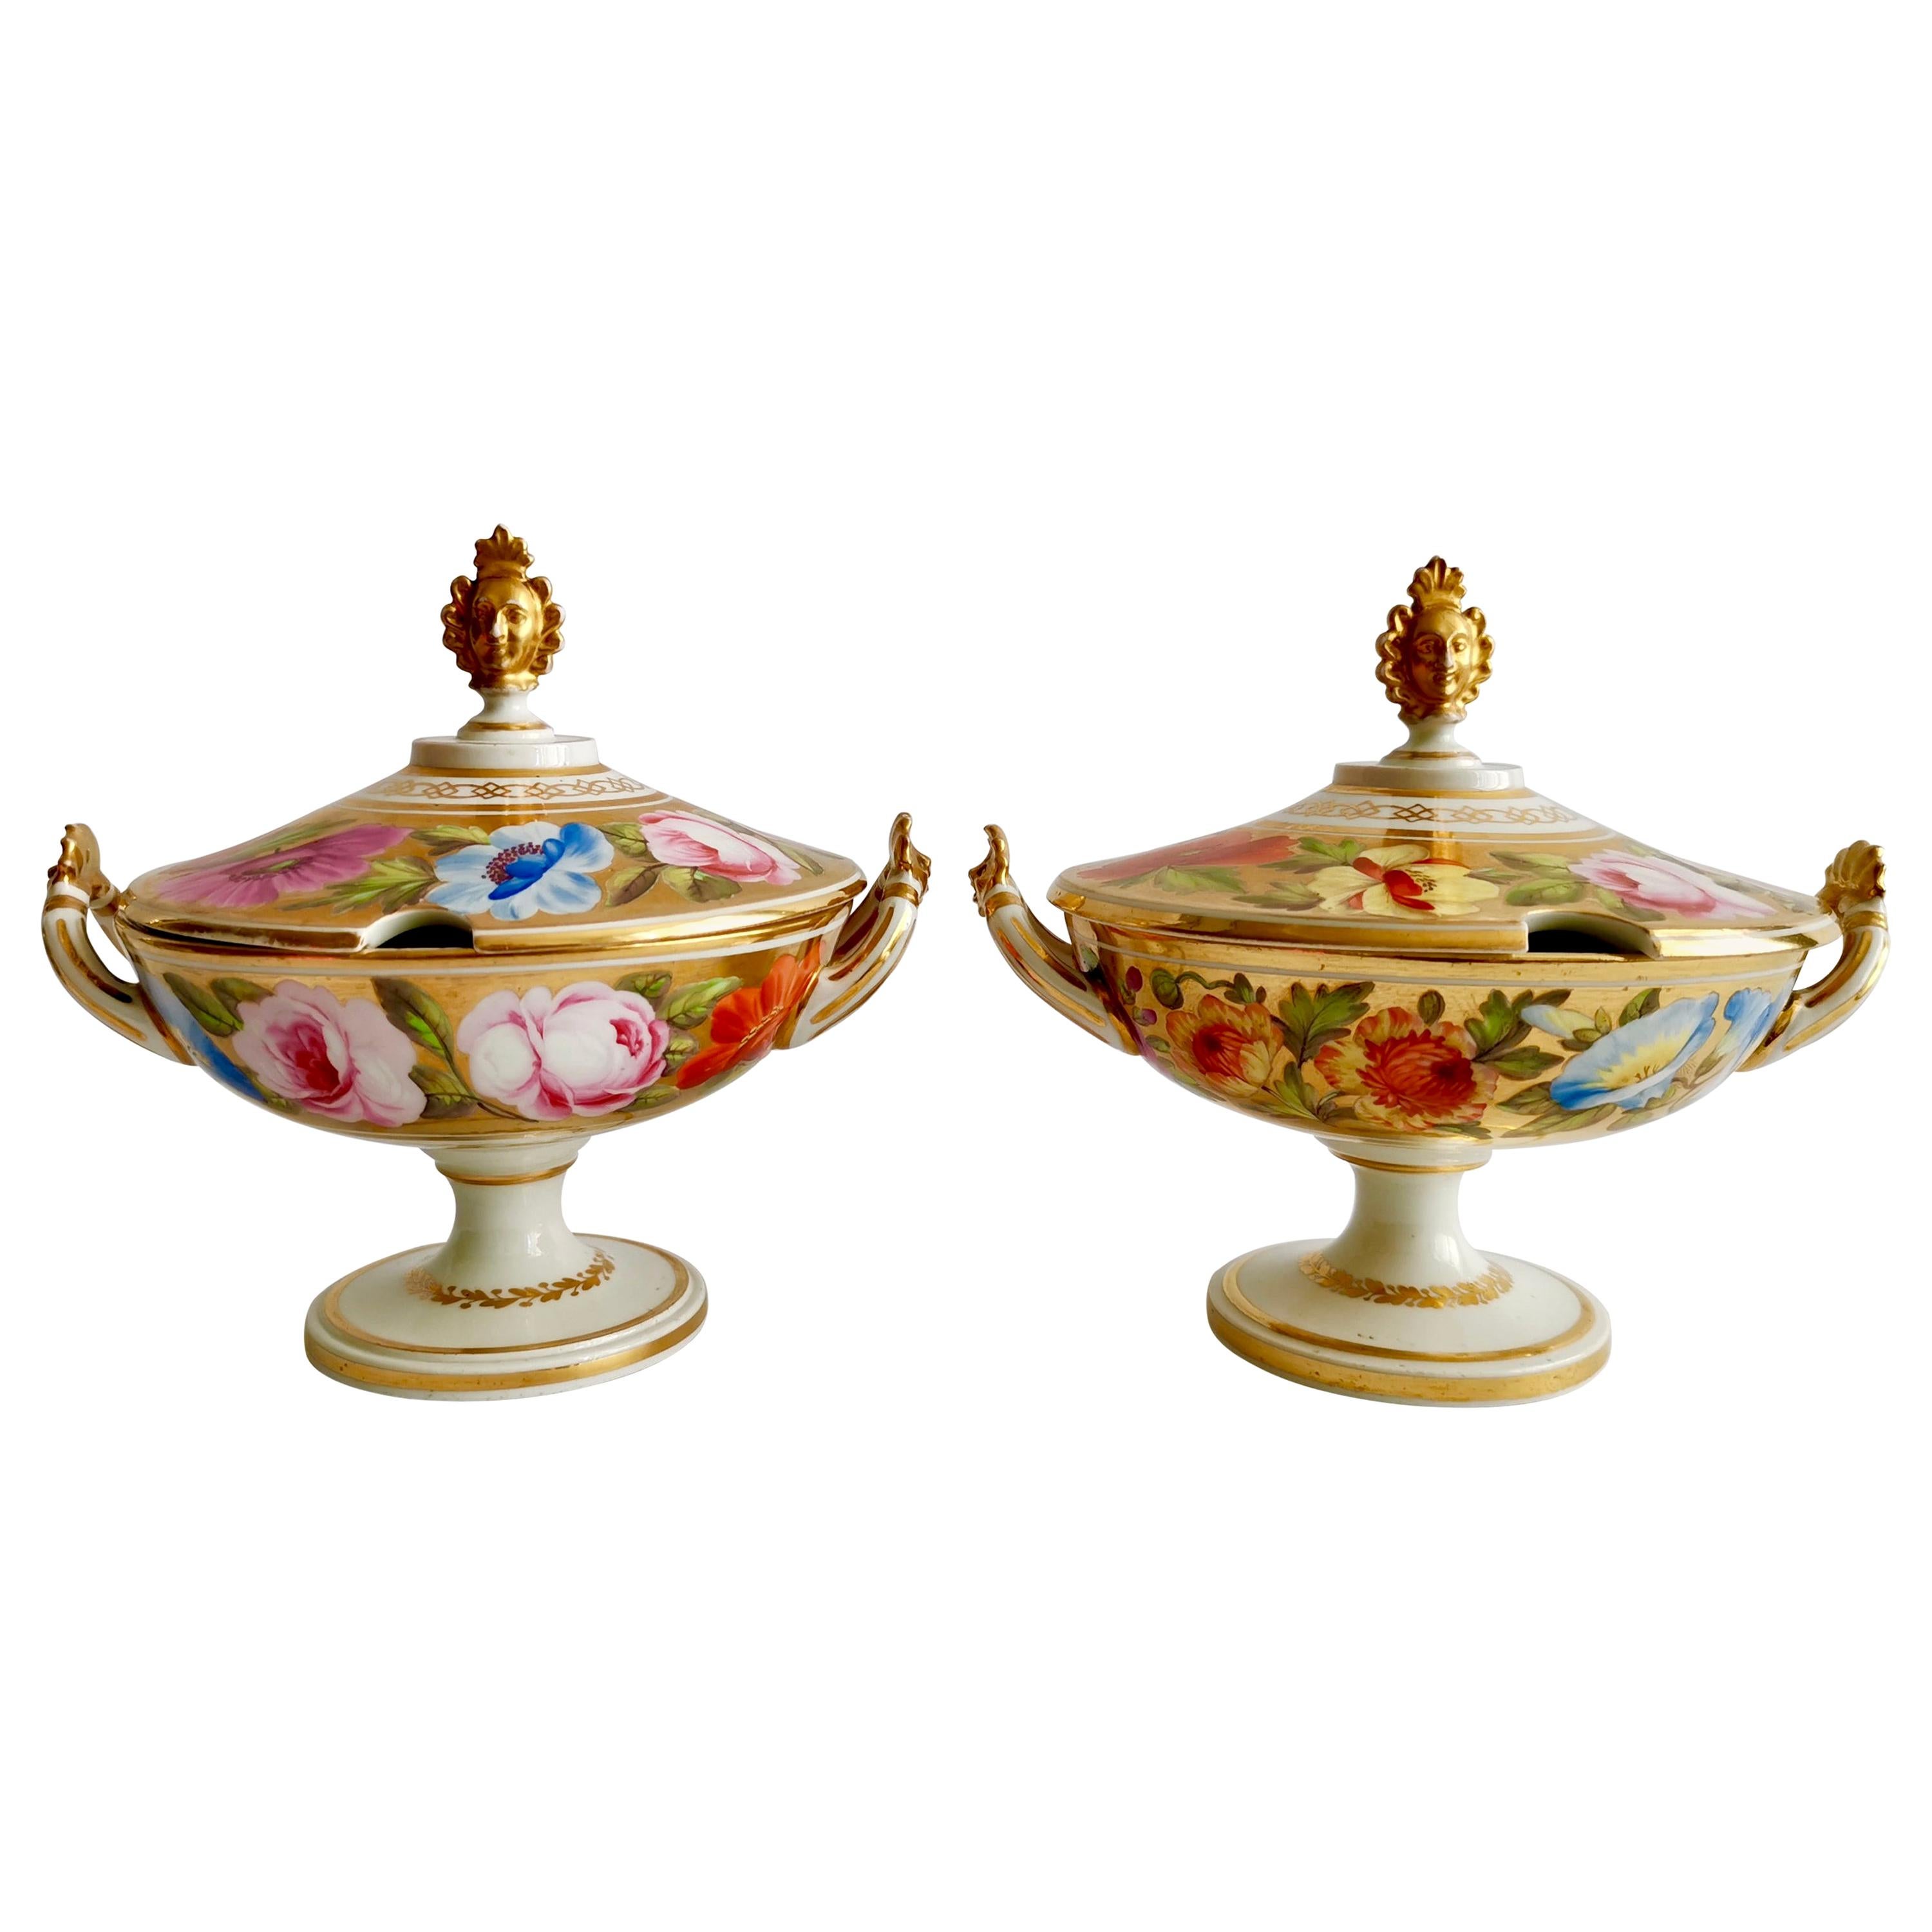 Coalport Pair of Floral Gilded Sauce Tureens, Marquess of Anglesey, circa 1820